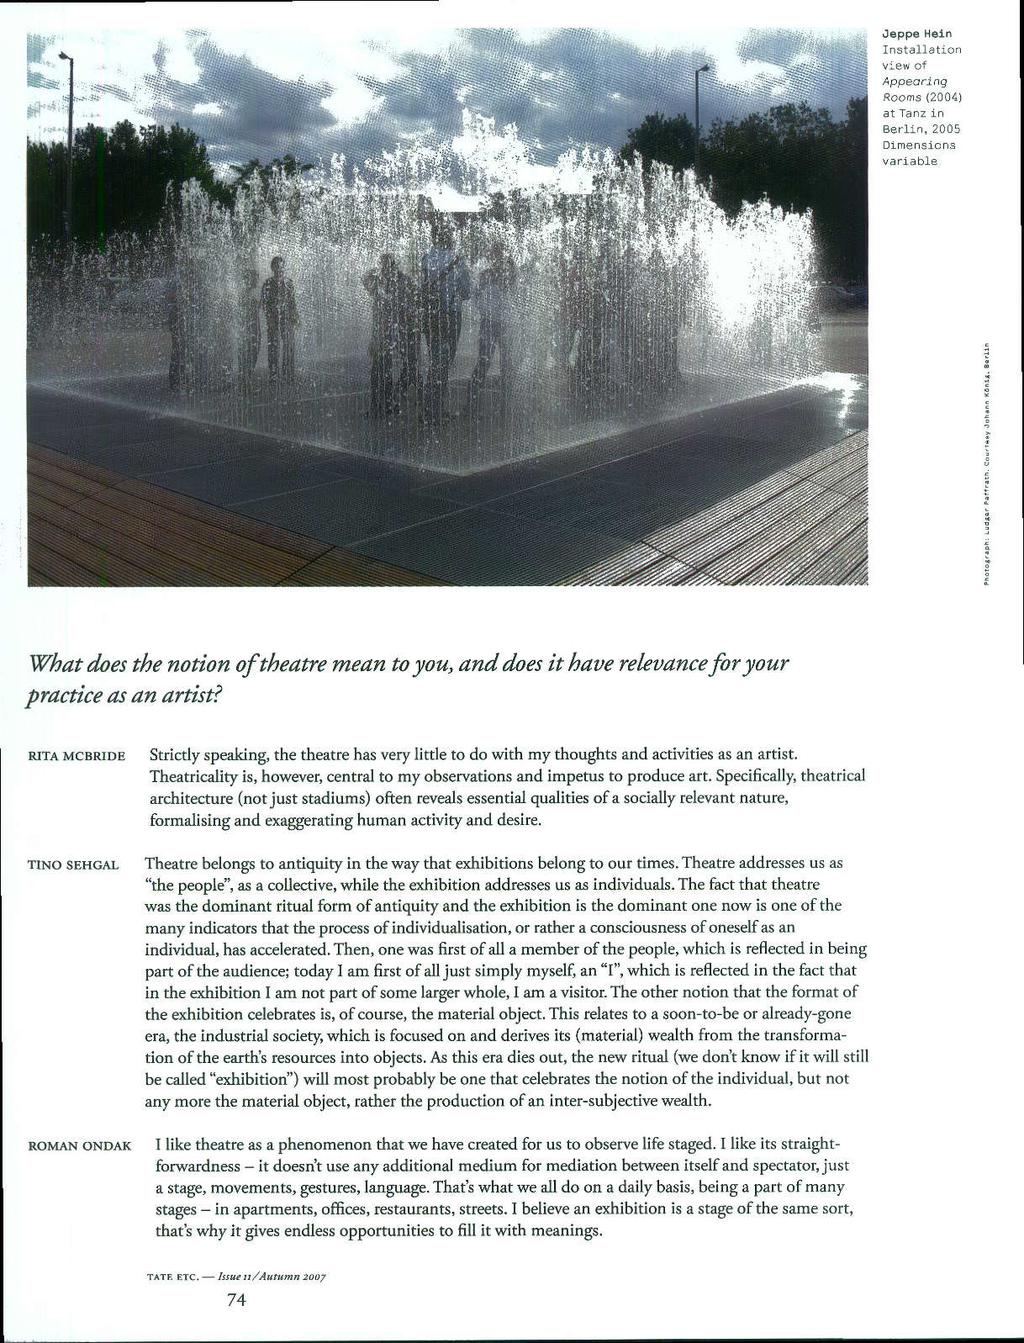 Jeppe Hein Installation view of Appearing Rooms (2004) at Tanz in Berlin, 2005 Dimensions variable What does the notion of theatre mean to you, and does it have relevance for your practice as an